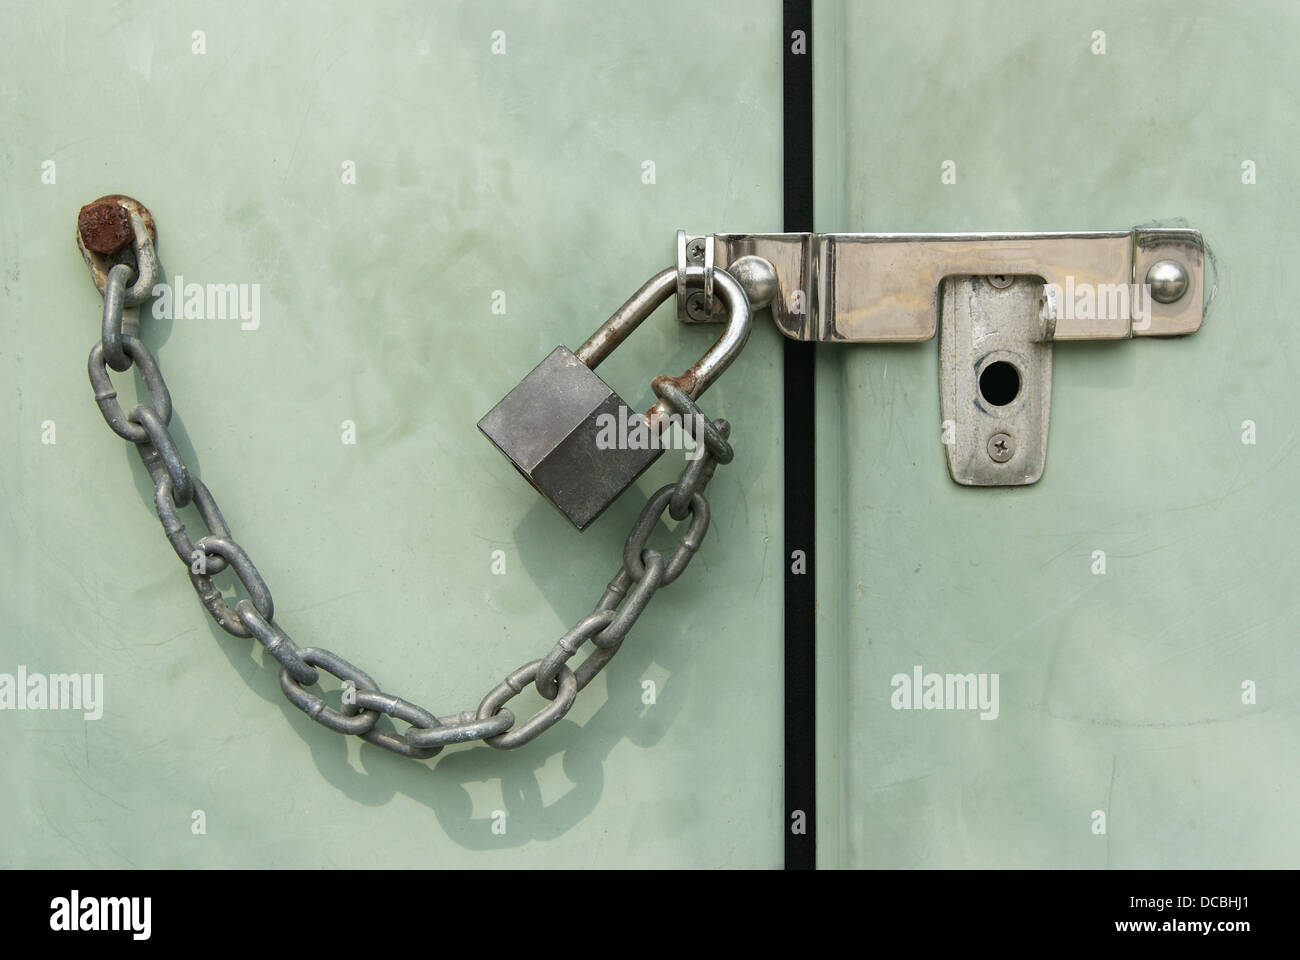 Grunge padlock chained and locked on telephone exchange cabinet Stock Photo